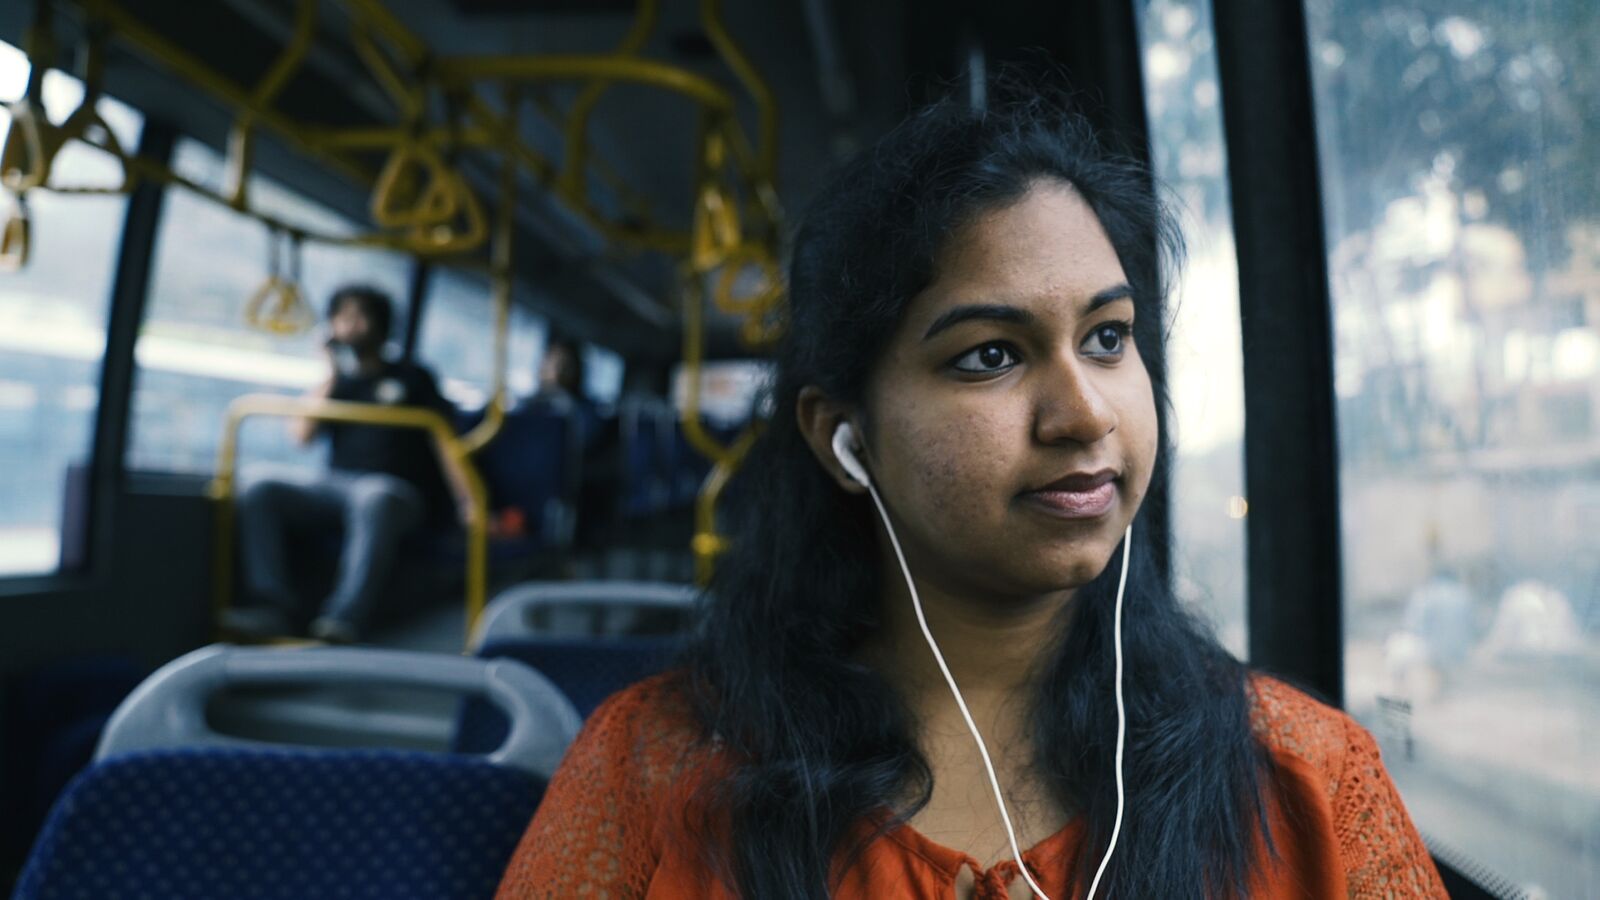 Foundation for Excellence scholarship recipient Supreeta rides a bus in India.